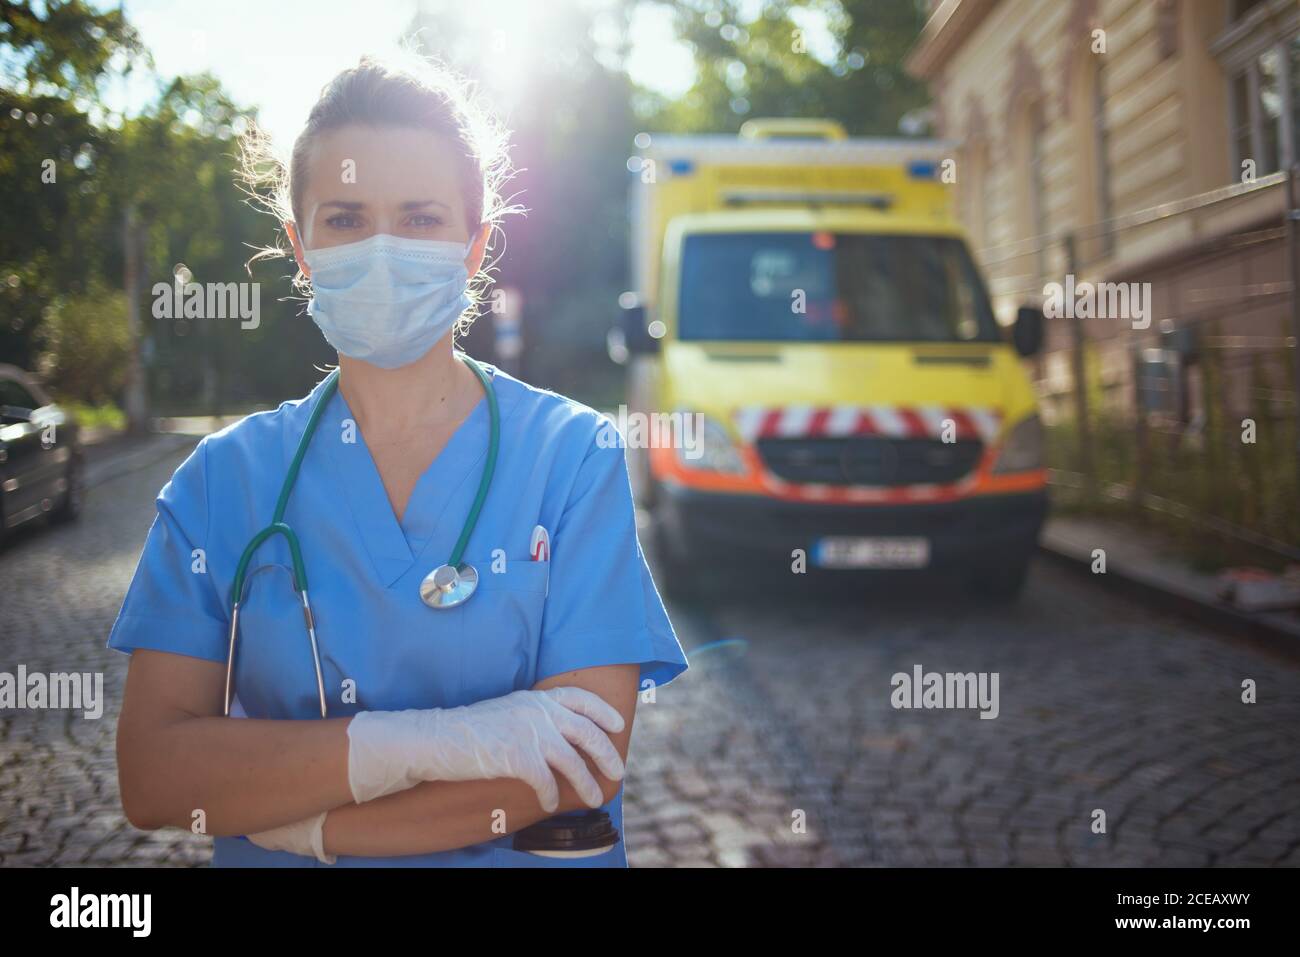 covid-19 pandemic. Portrait of modern paramedic woman in uniform with stethoscope and medical mask outside near ambulance. Stock Photo